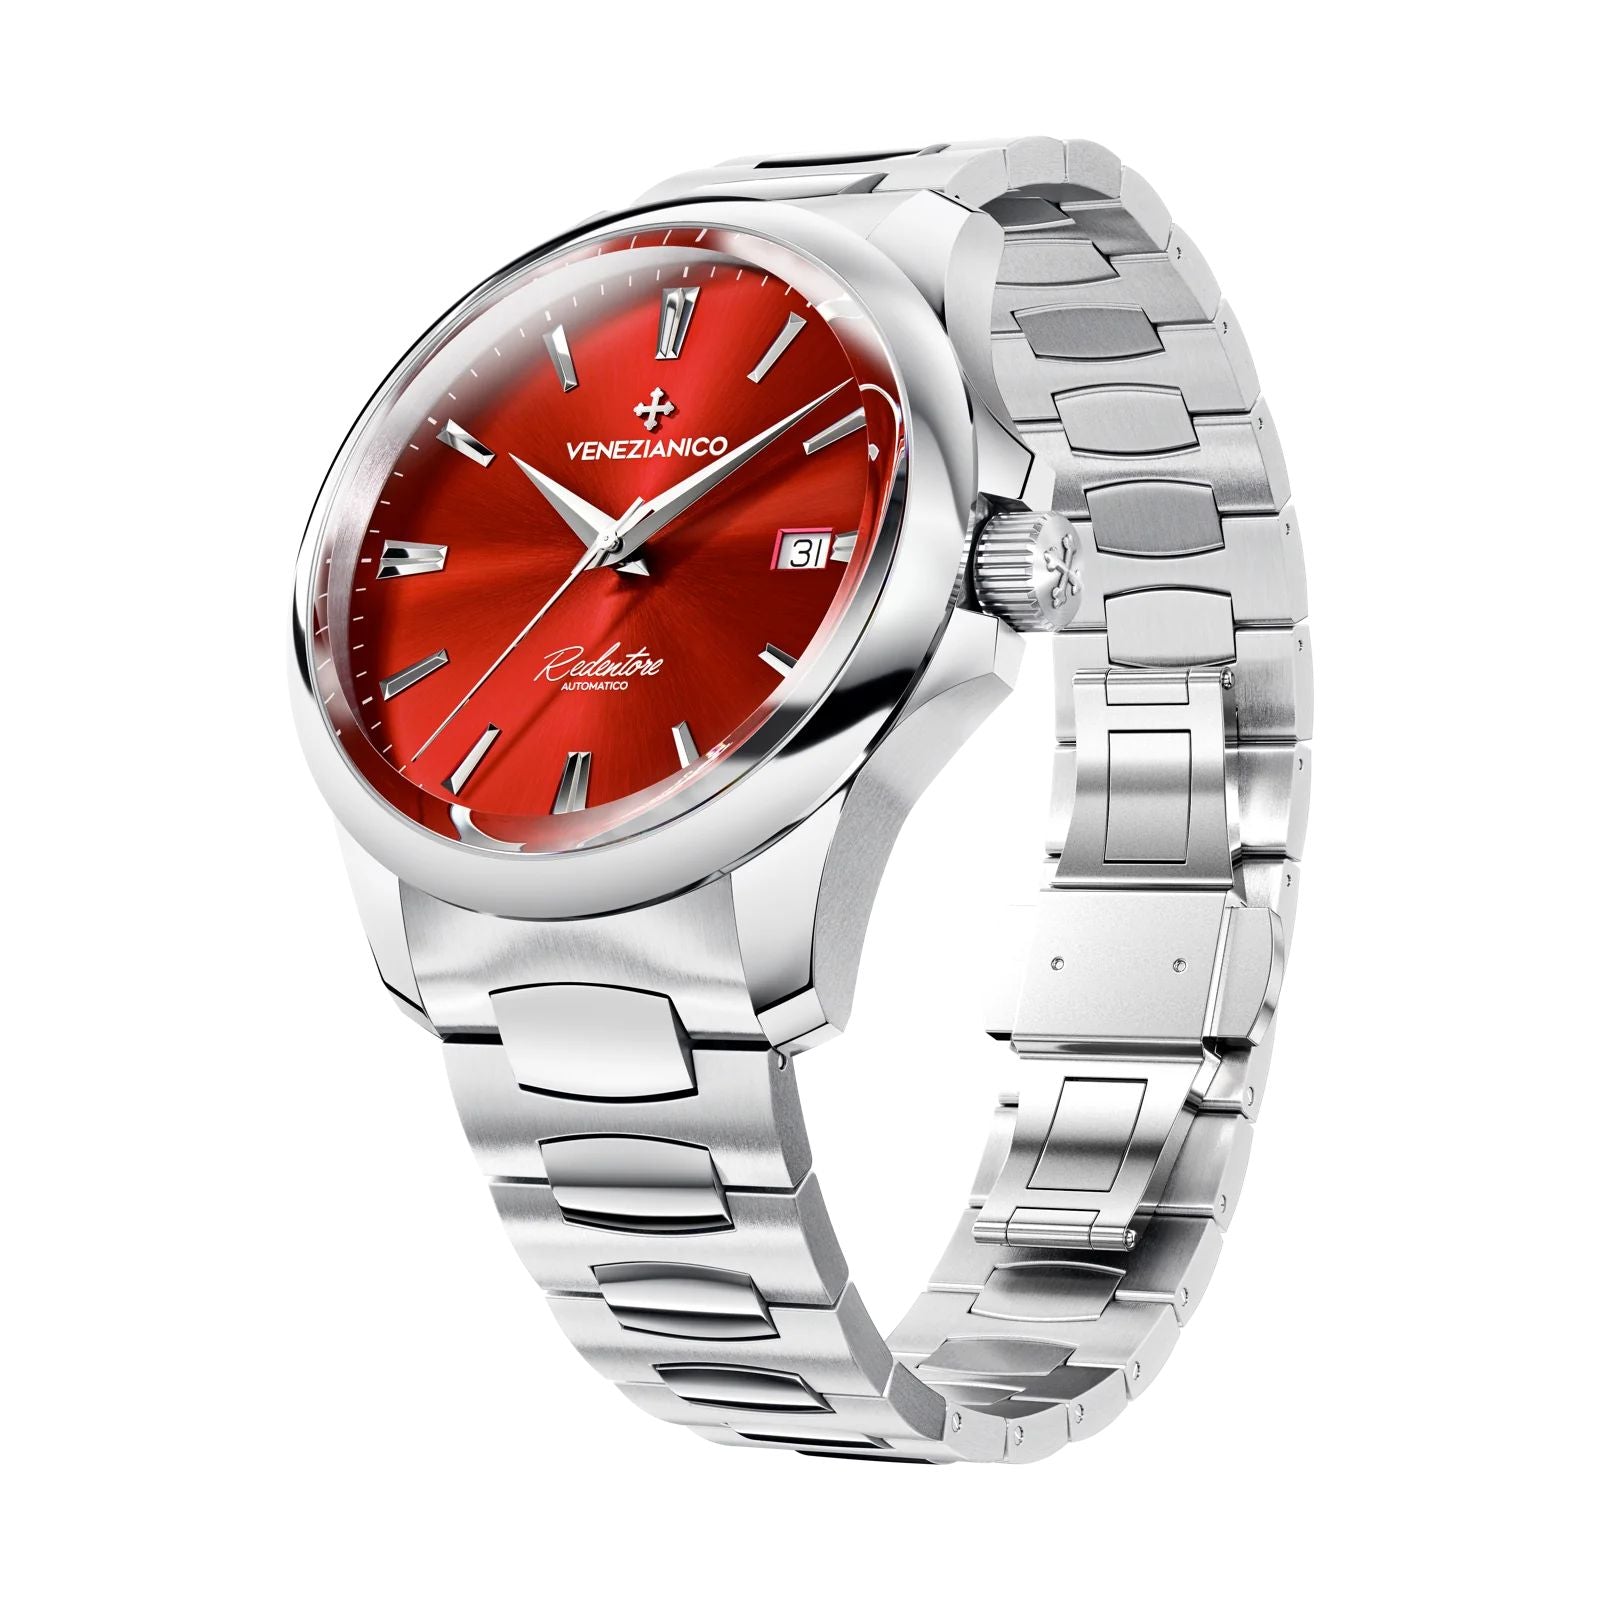 Redentore – 40mm by  Venezianico |  Time Keeper.